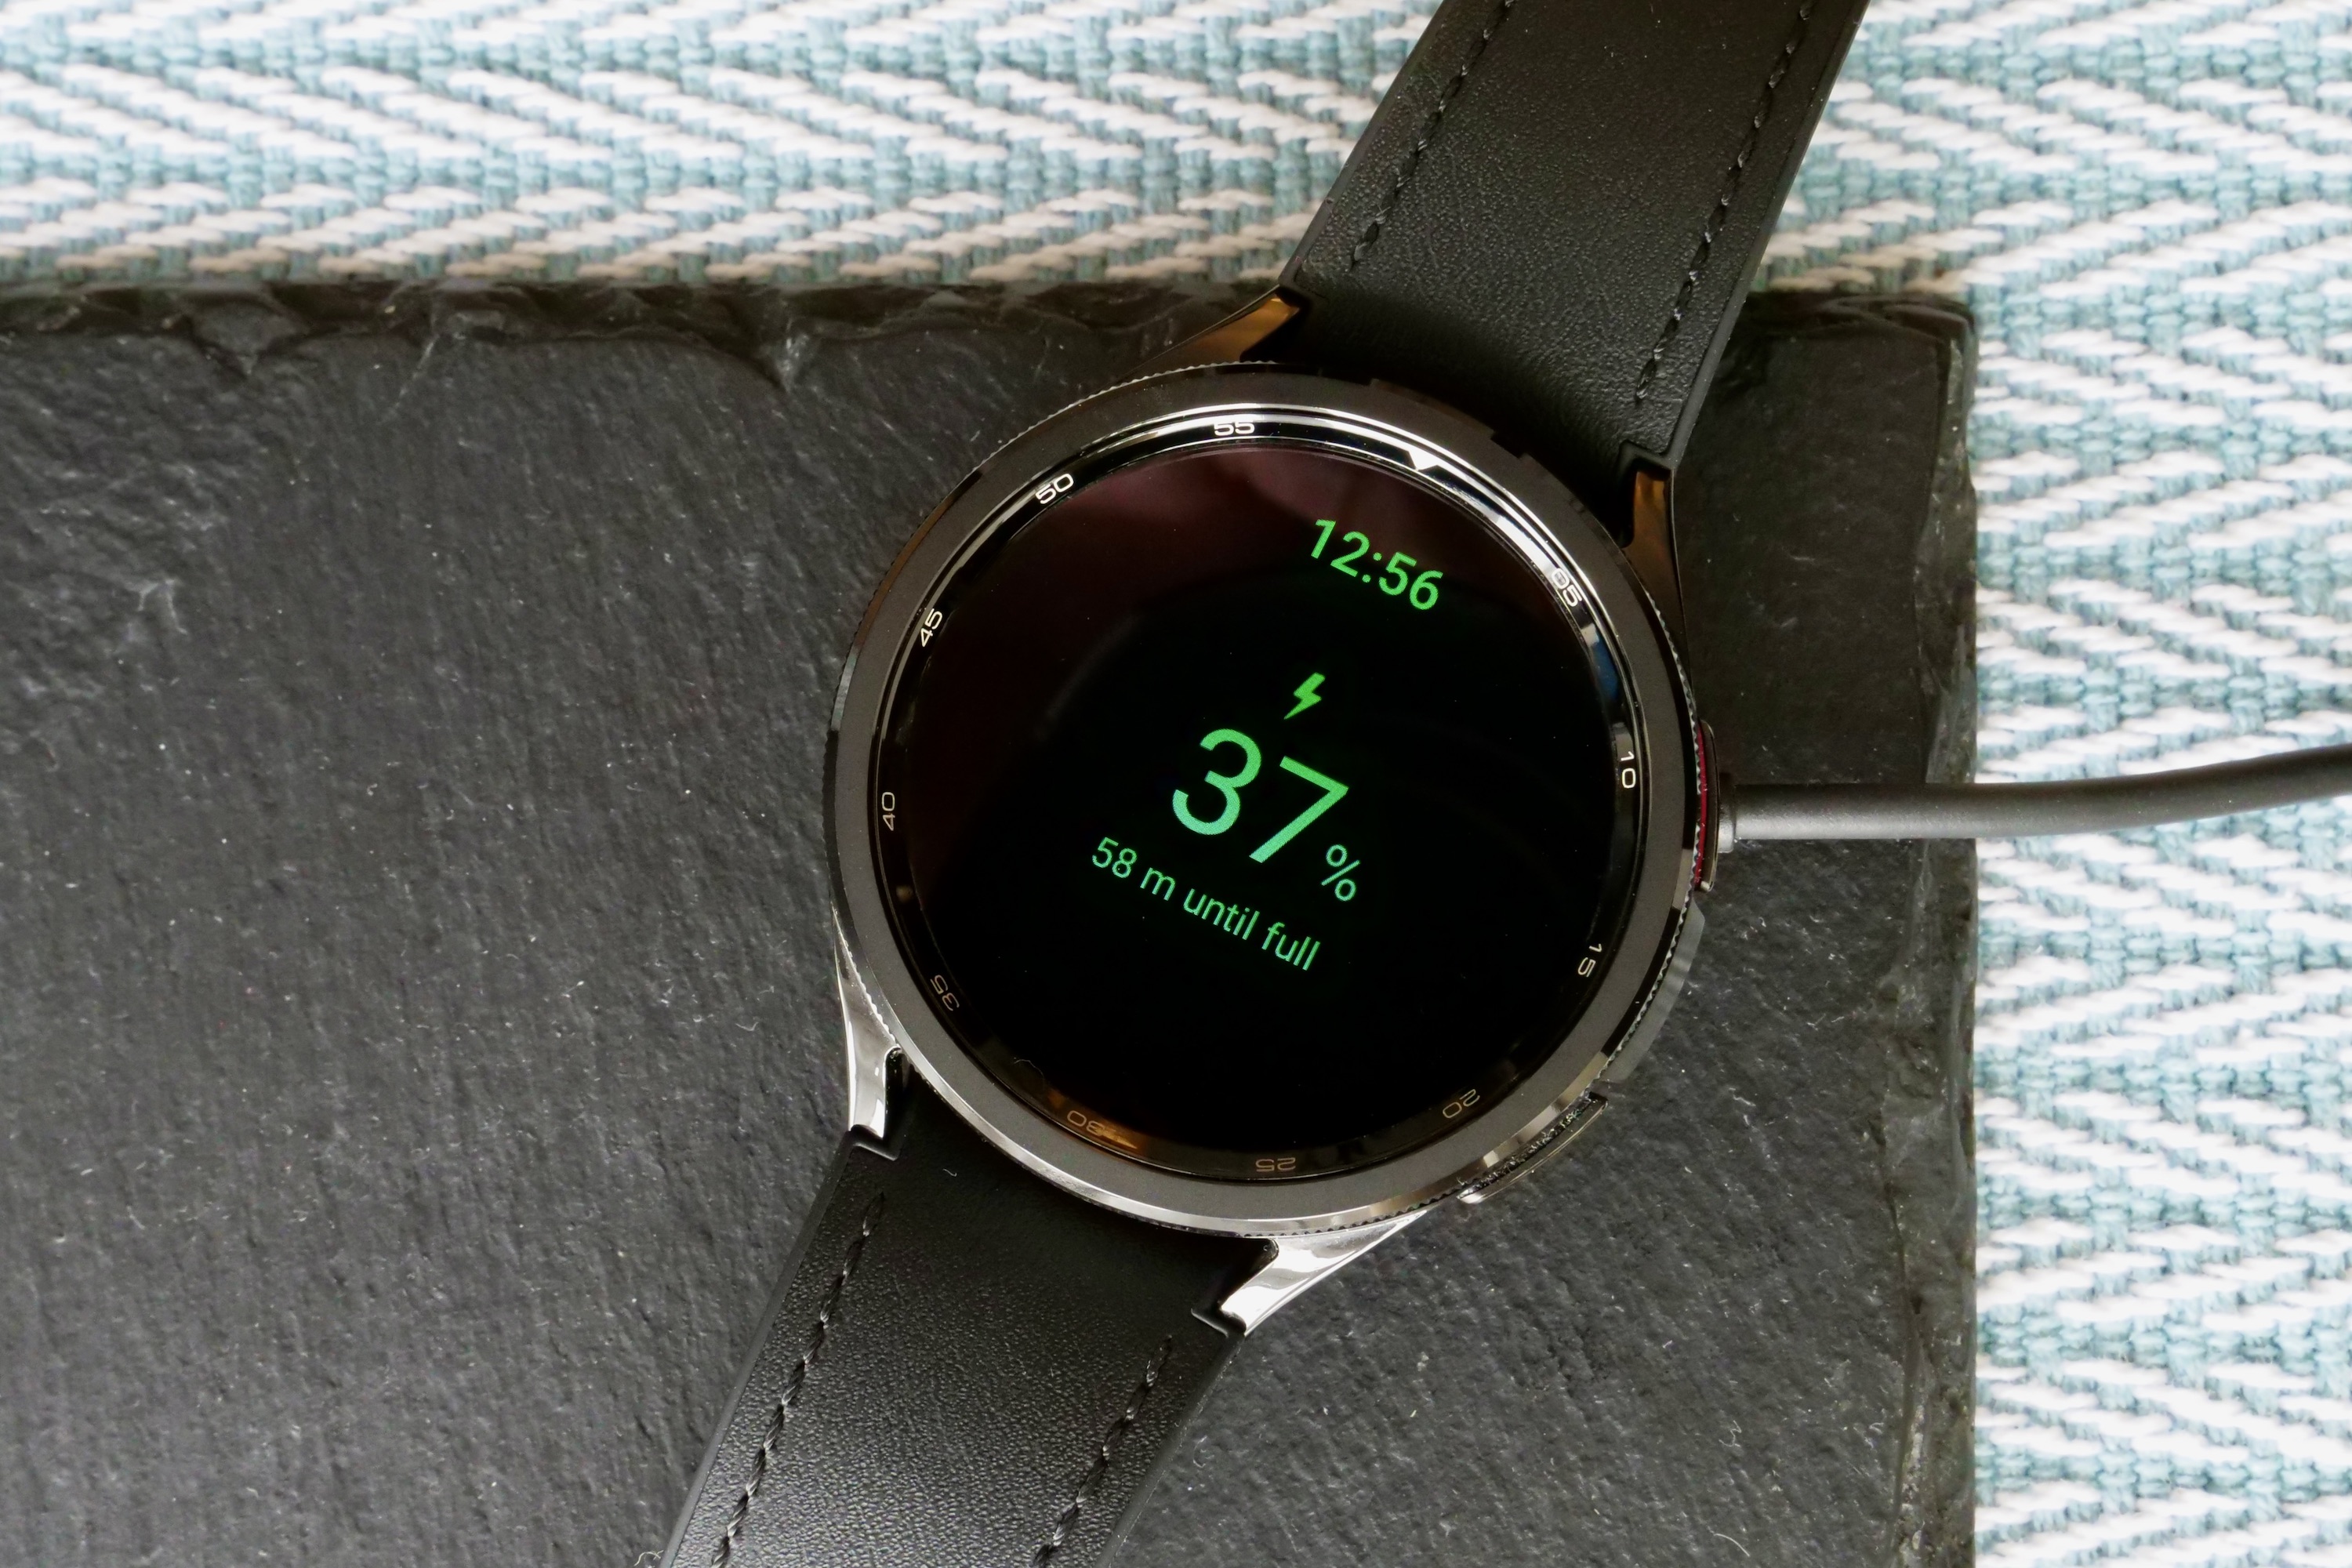 Samsung Galaxy Watch 7 Ultra: news, rumored price, release date, and more